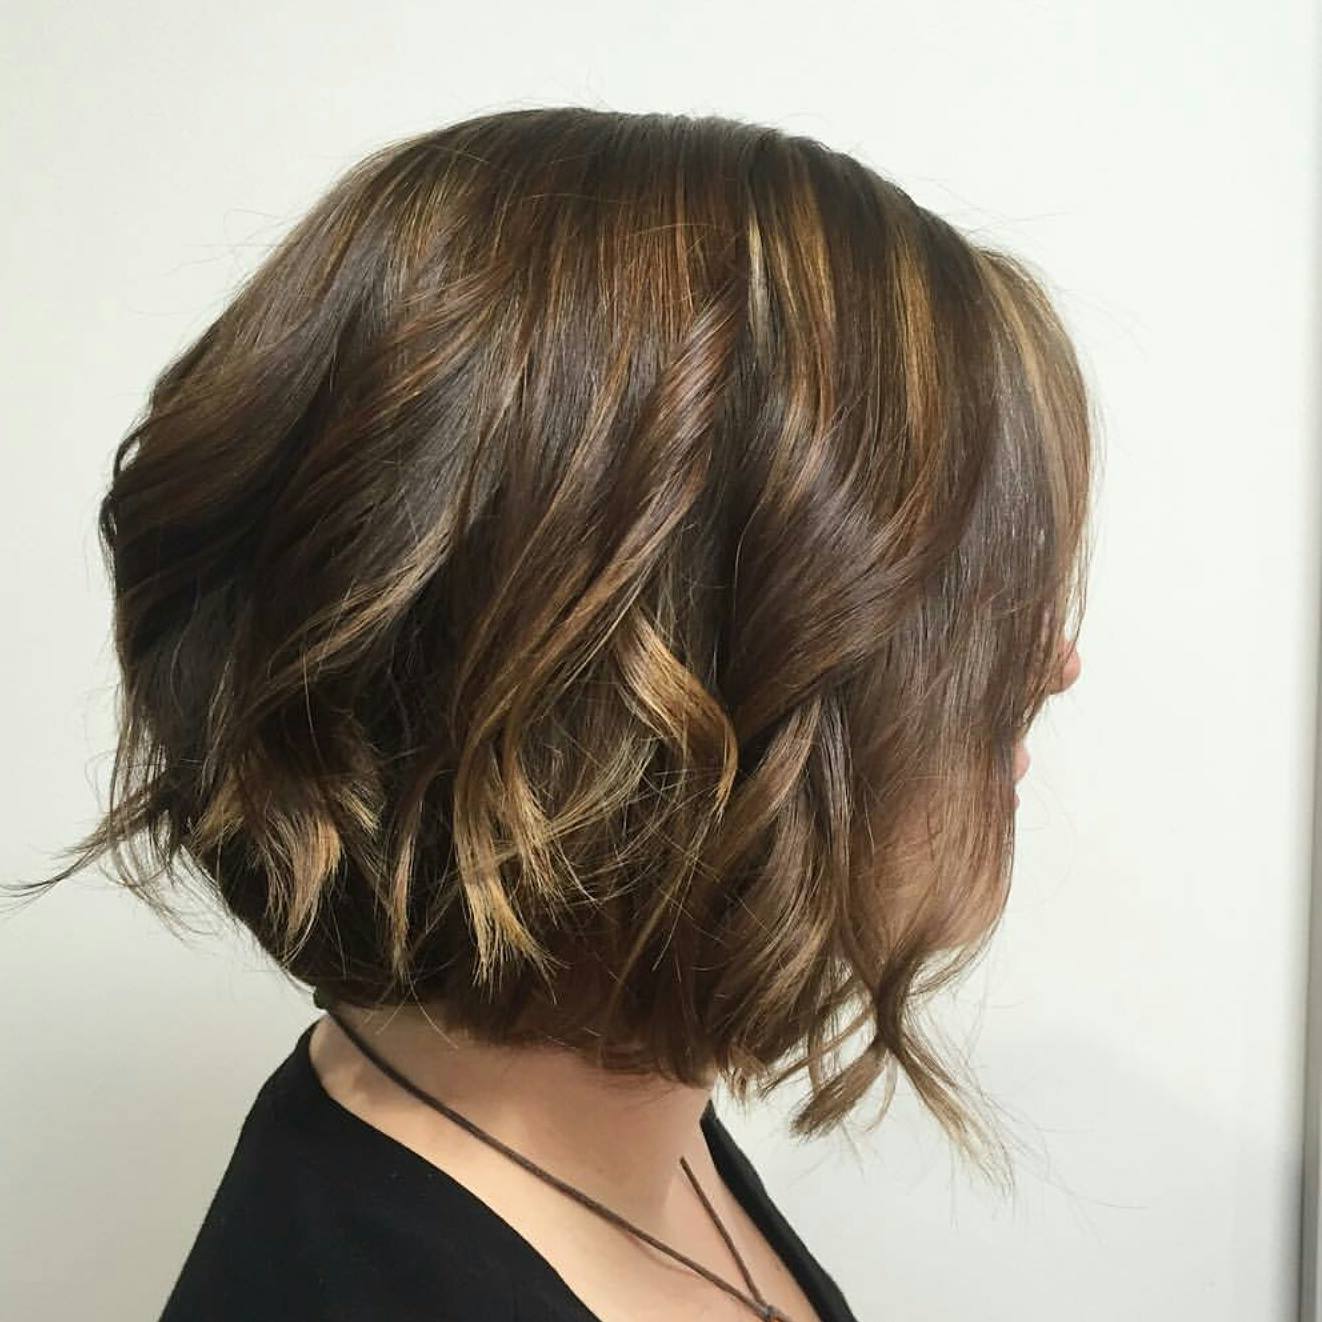 Short Hair Thoughts Ideas And Tips From The Brains Of